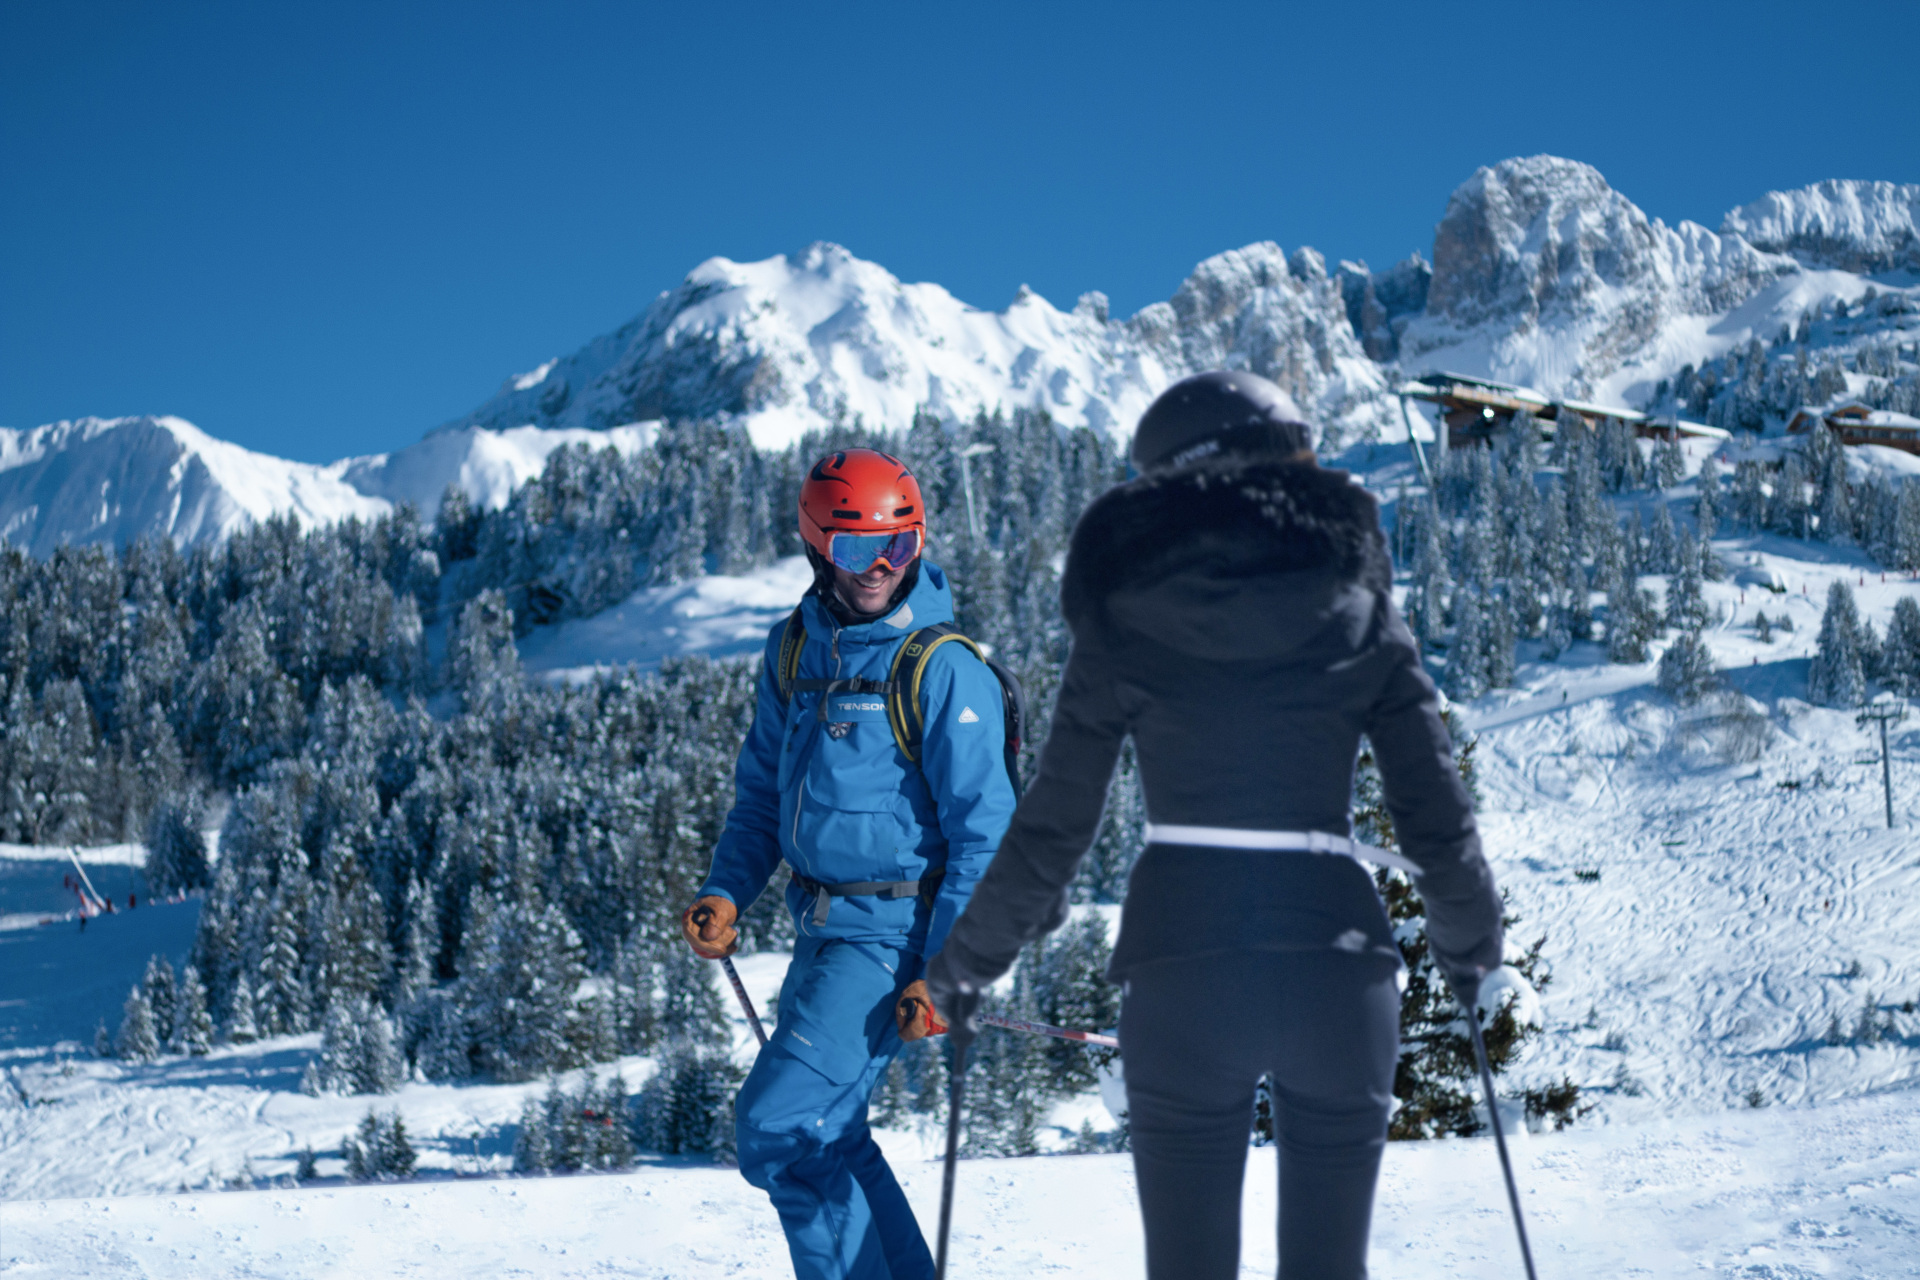 Maison Sport - People learning to ski in the mountains